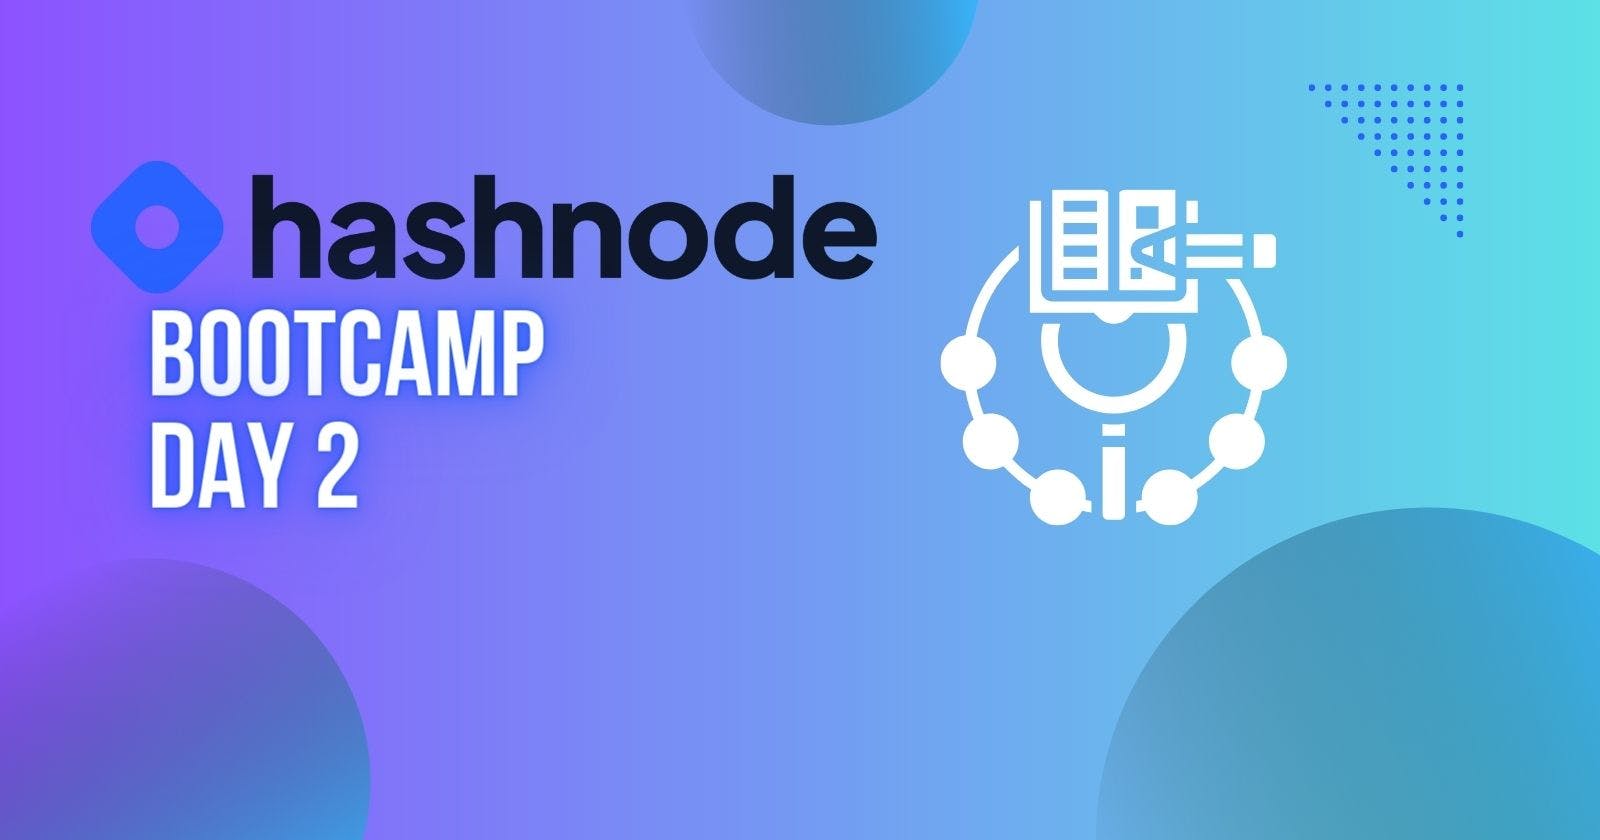 Personal Branding and Community Engagement- Day 2 of hashnode Bootcamp